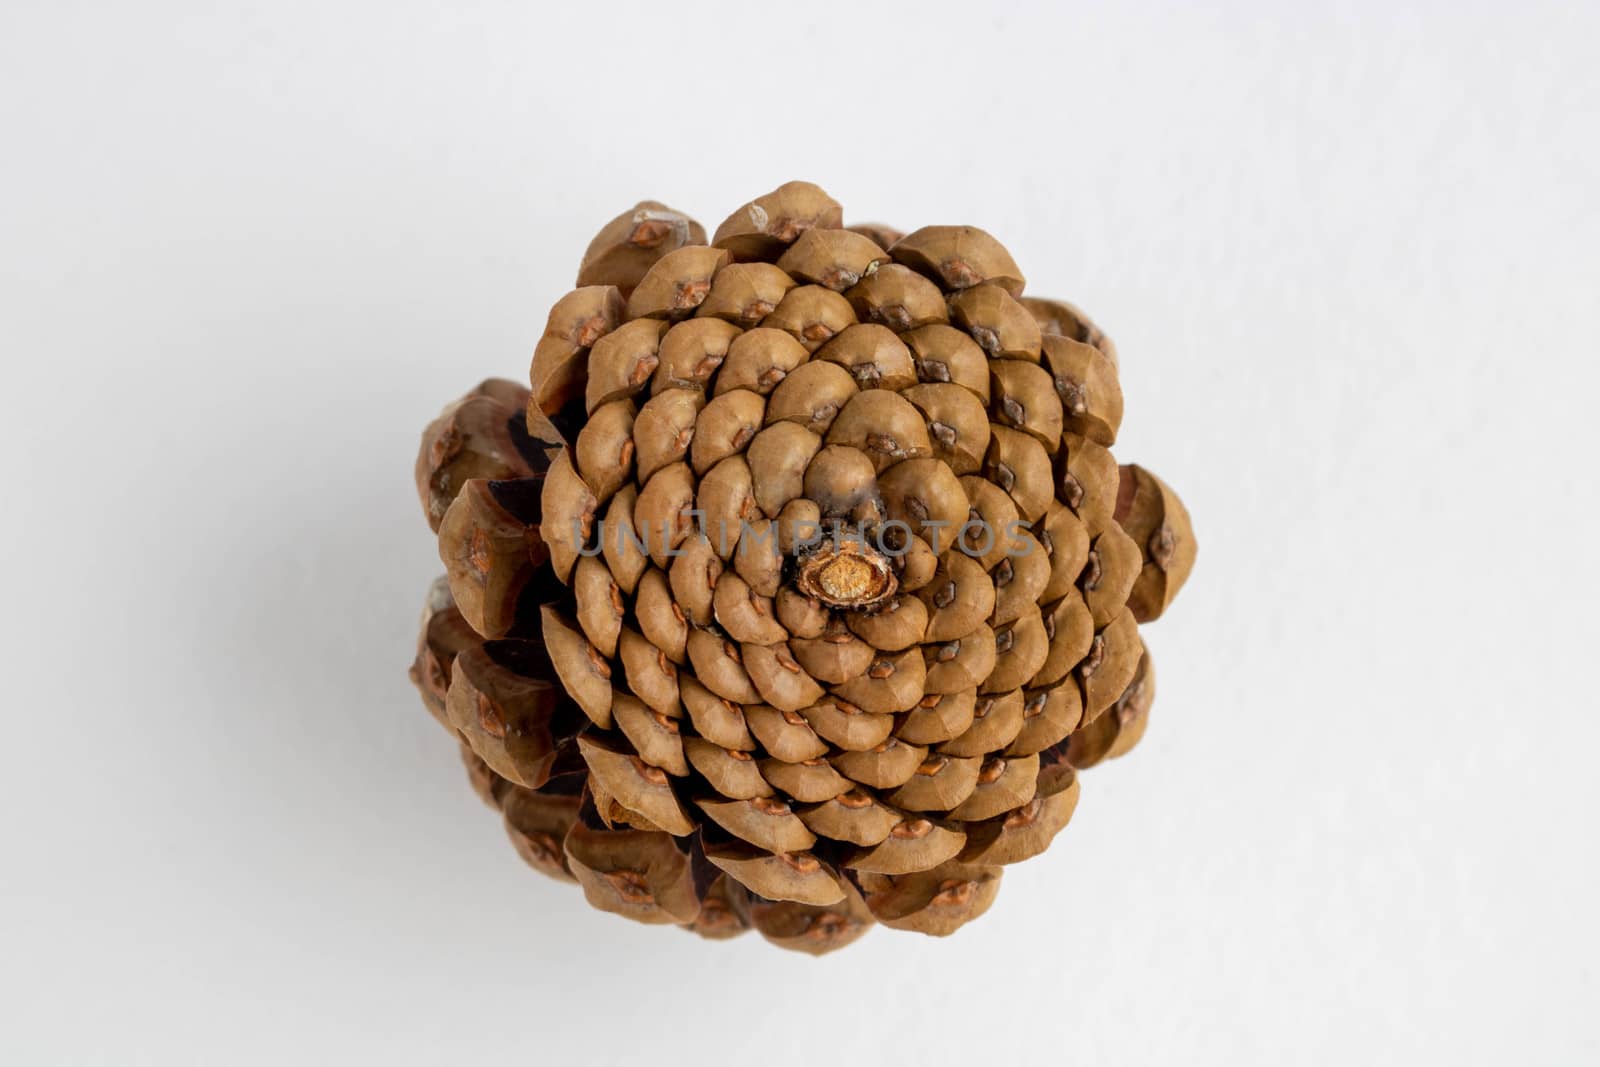 Inverted pine cone isolated on a white background.